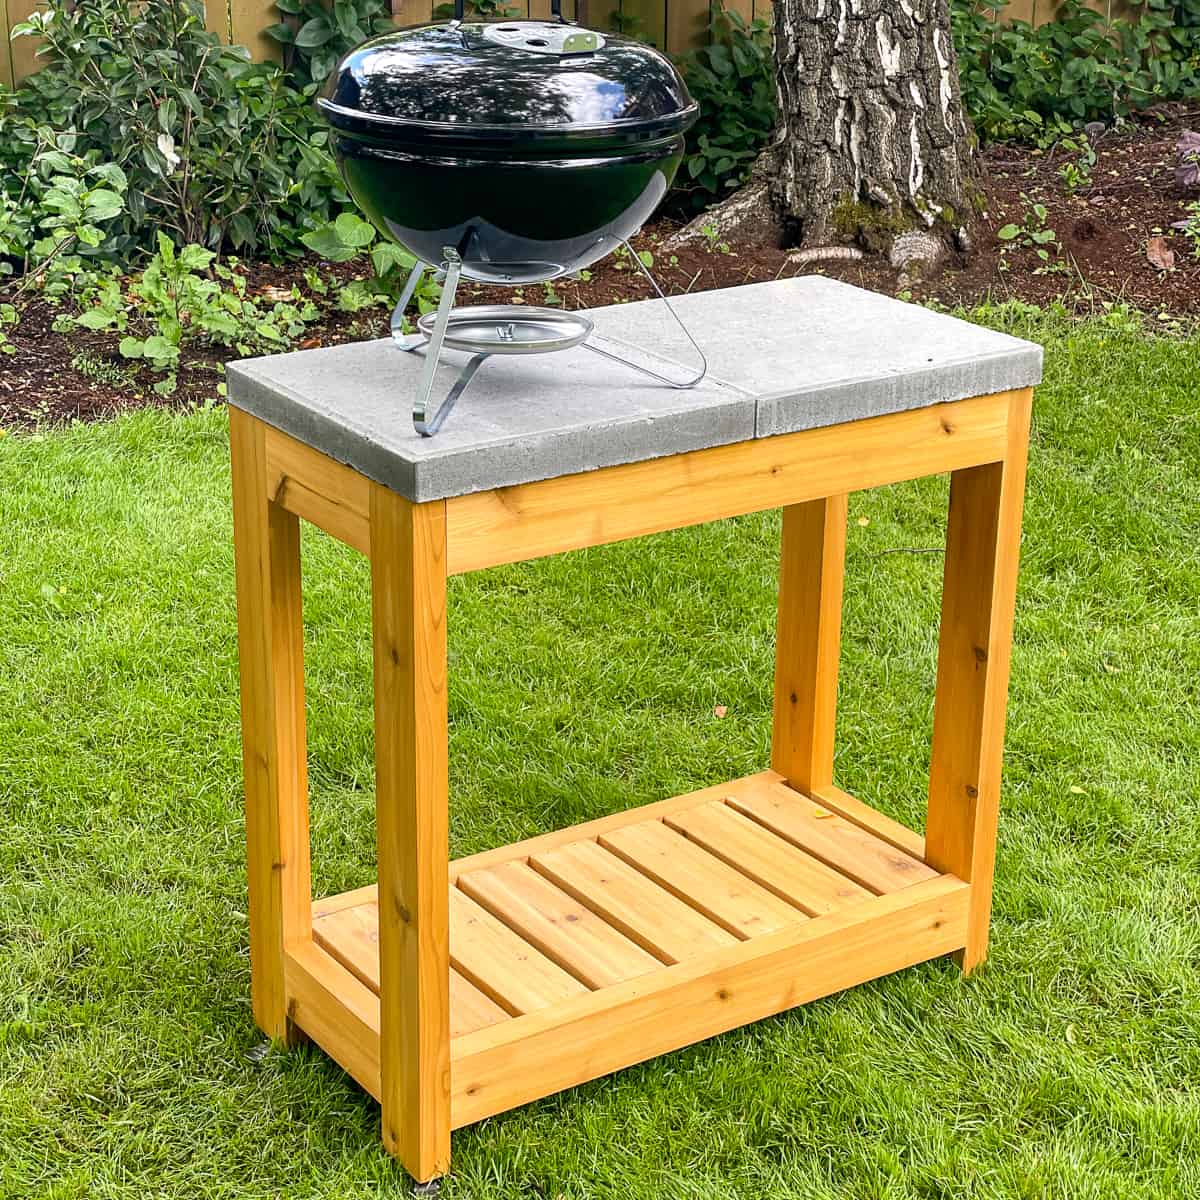 https://www.thehandymansdaughter.com/wp-content/uploads/2022/06/diy-grill-station-final-square.jpg